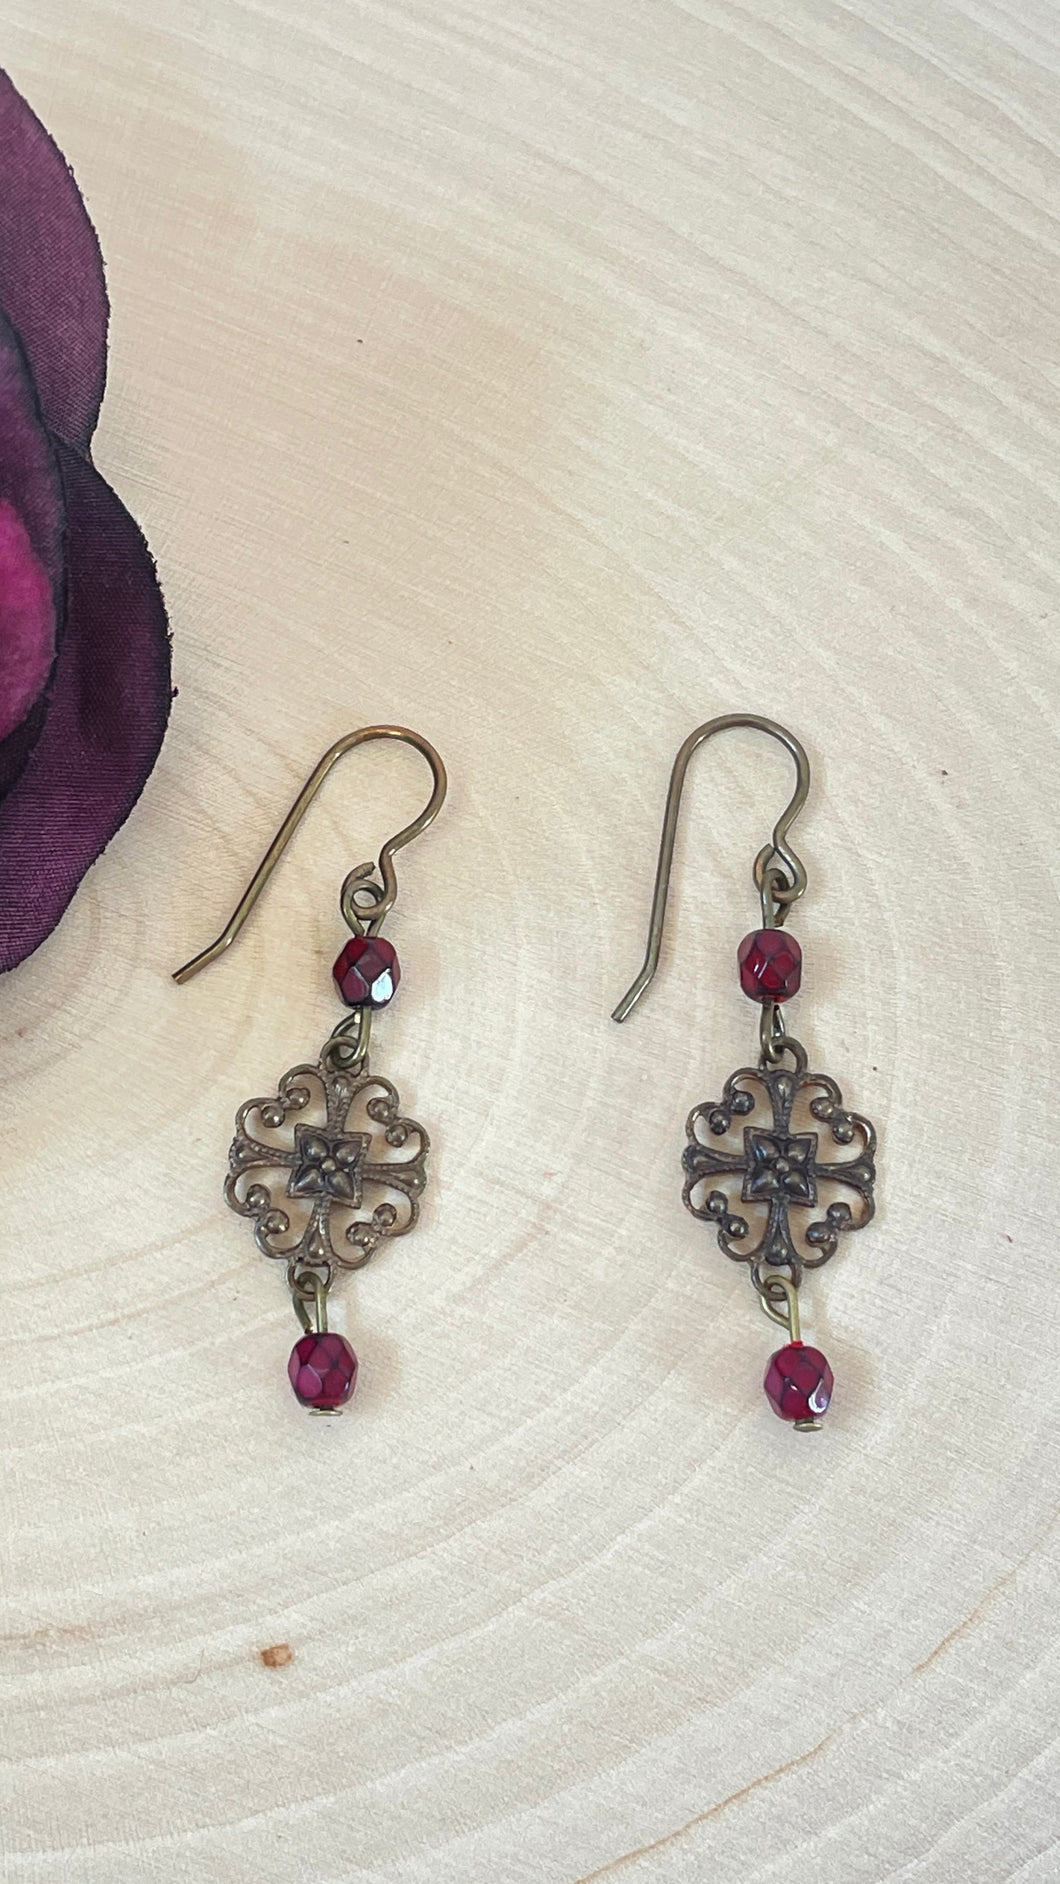 Vintage Look Dangle Ear Rings with Brass Filigree Links and Burgundy Beads